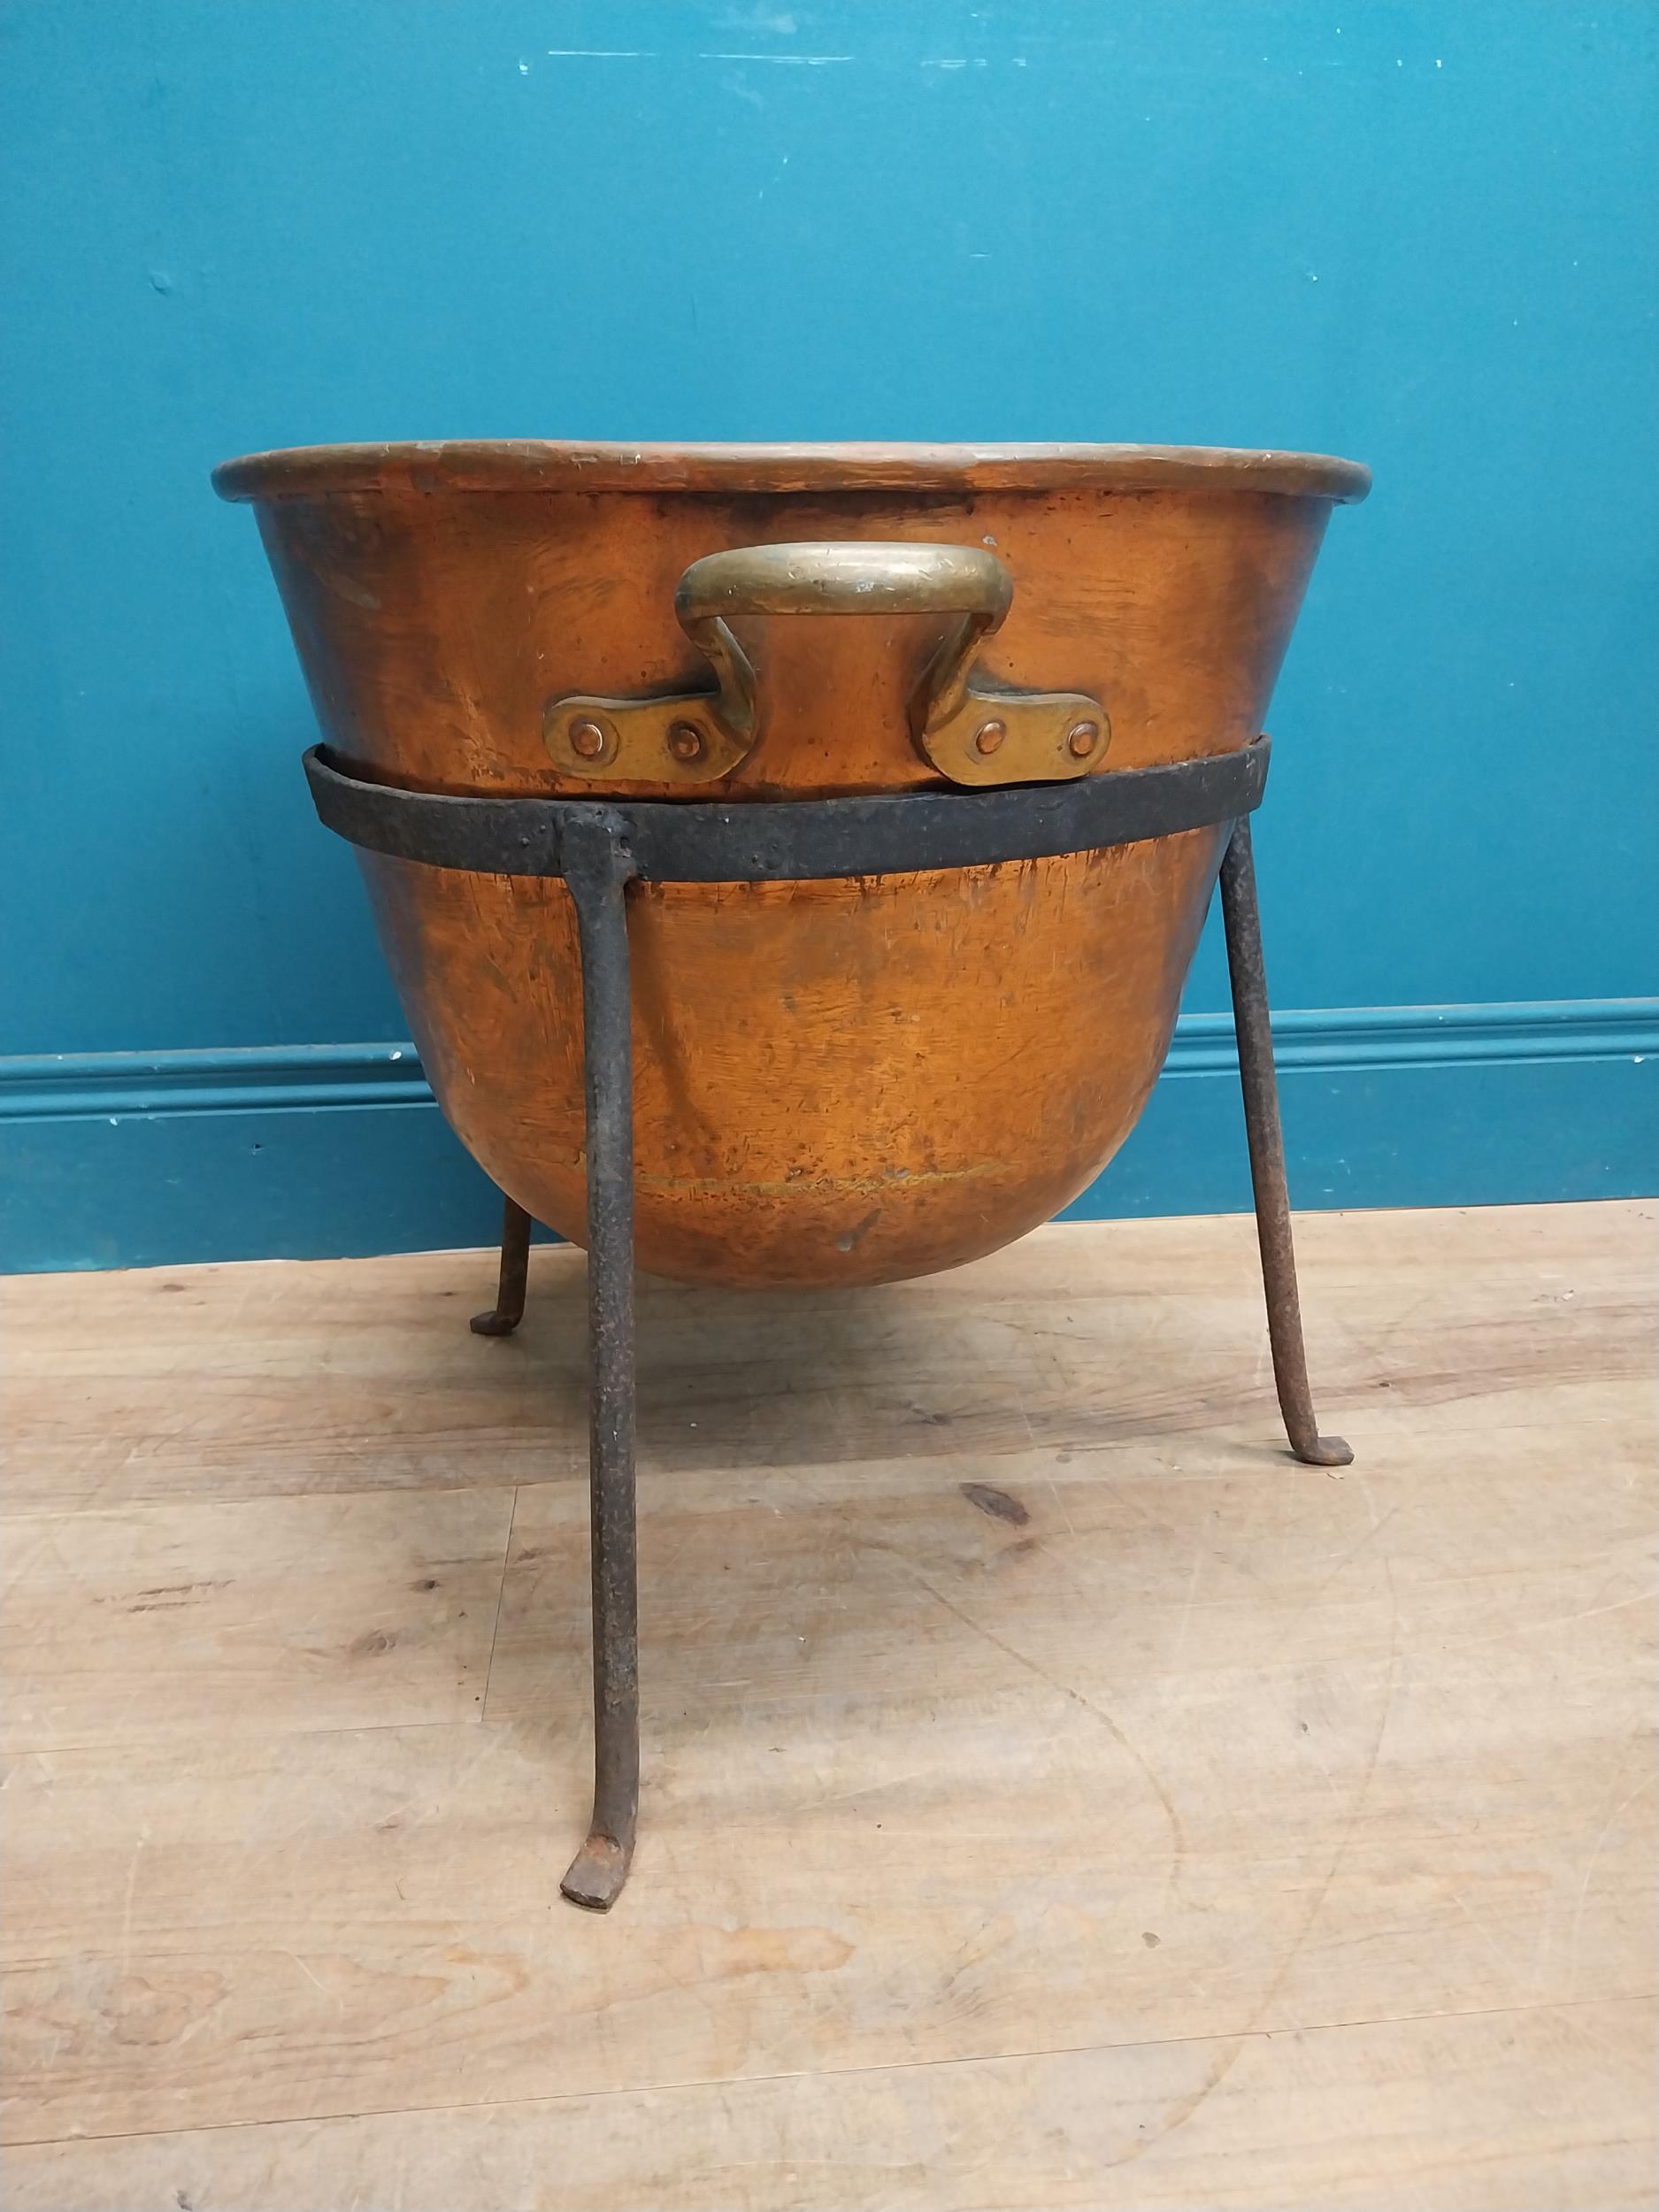 Early 20th C. copper and metal log bucket with two handles on tripod base. {} - Image 3 of 4